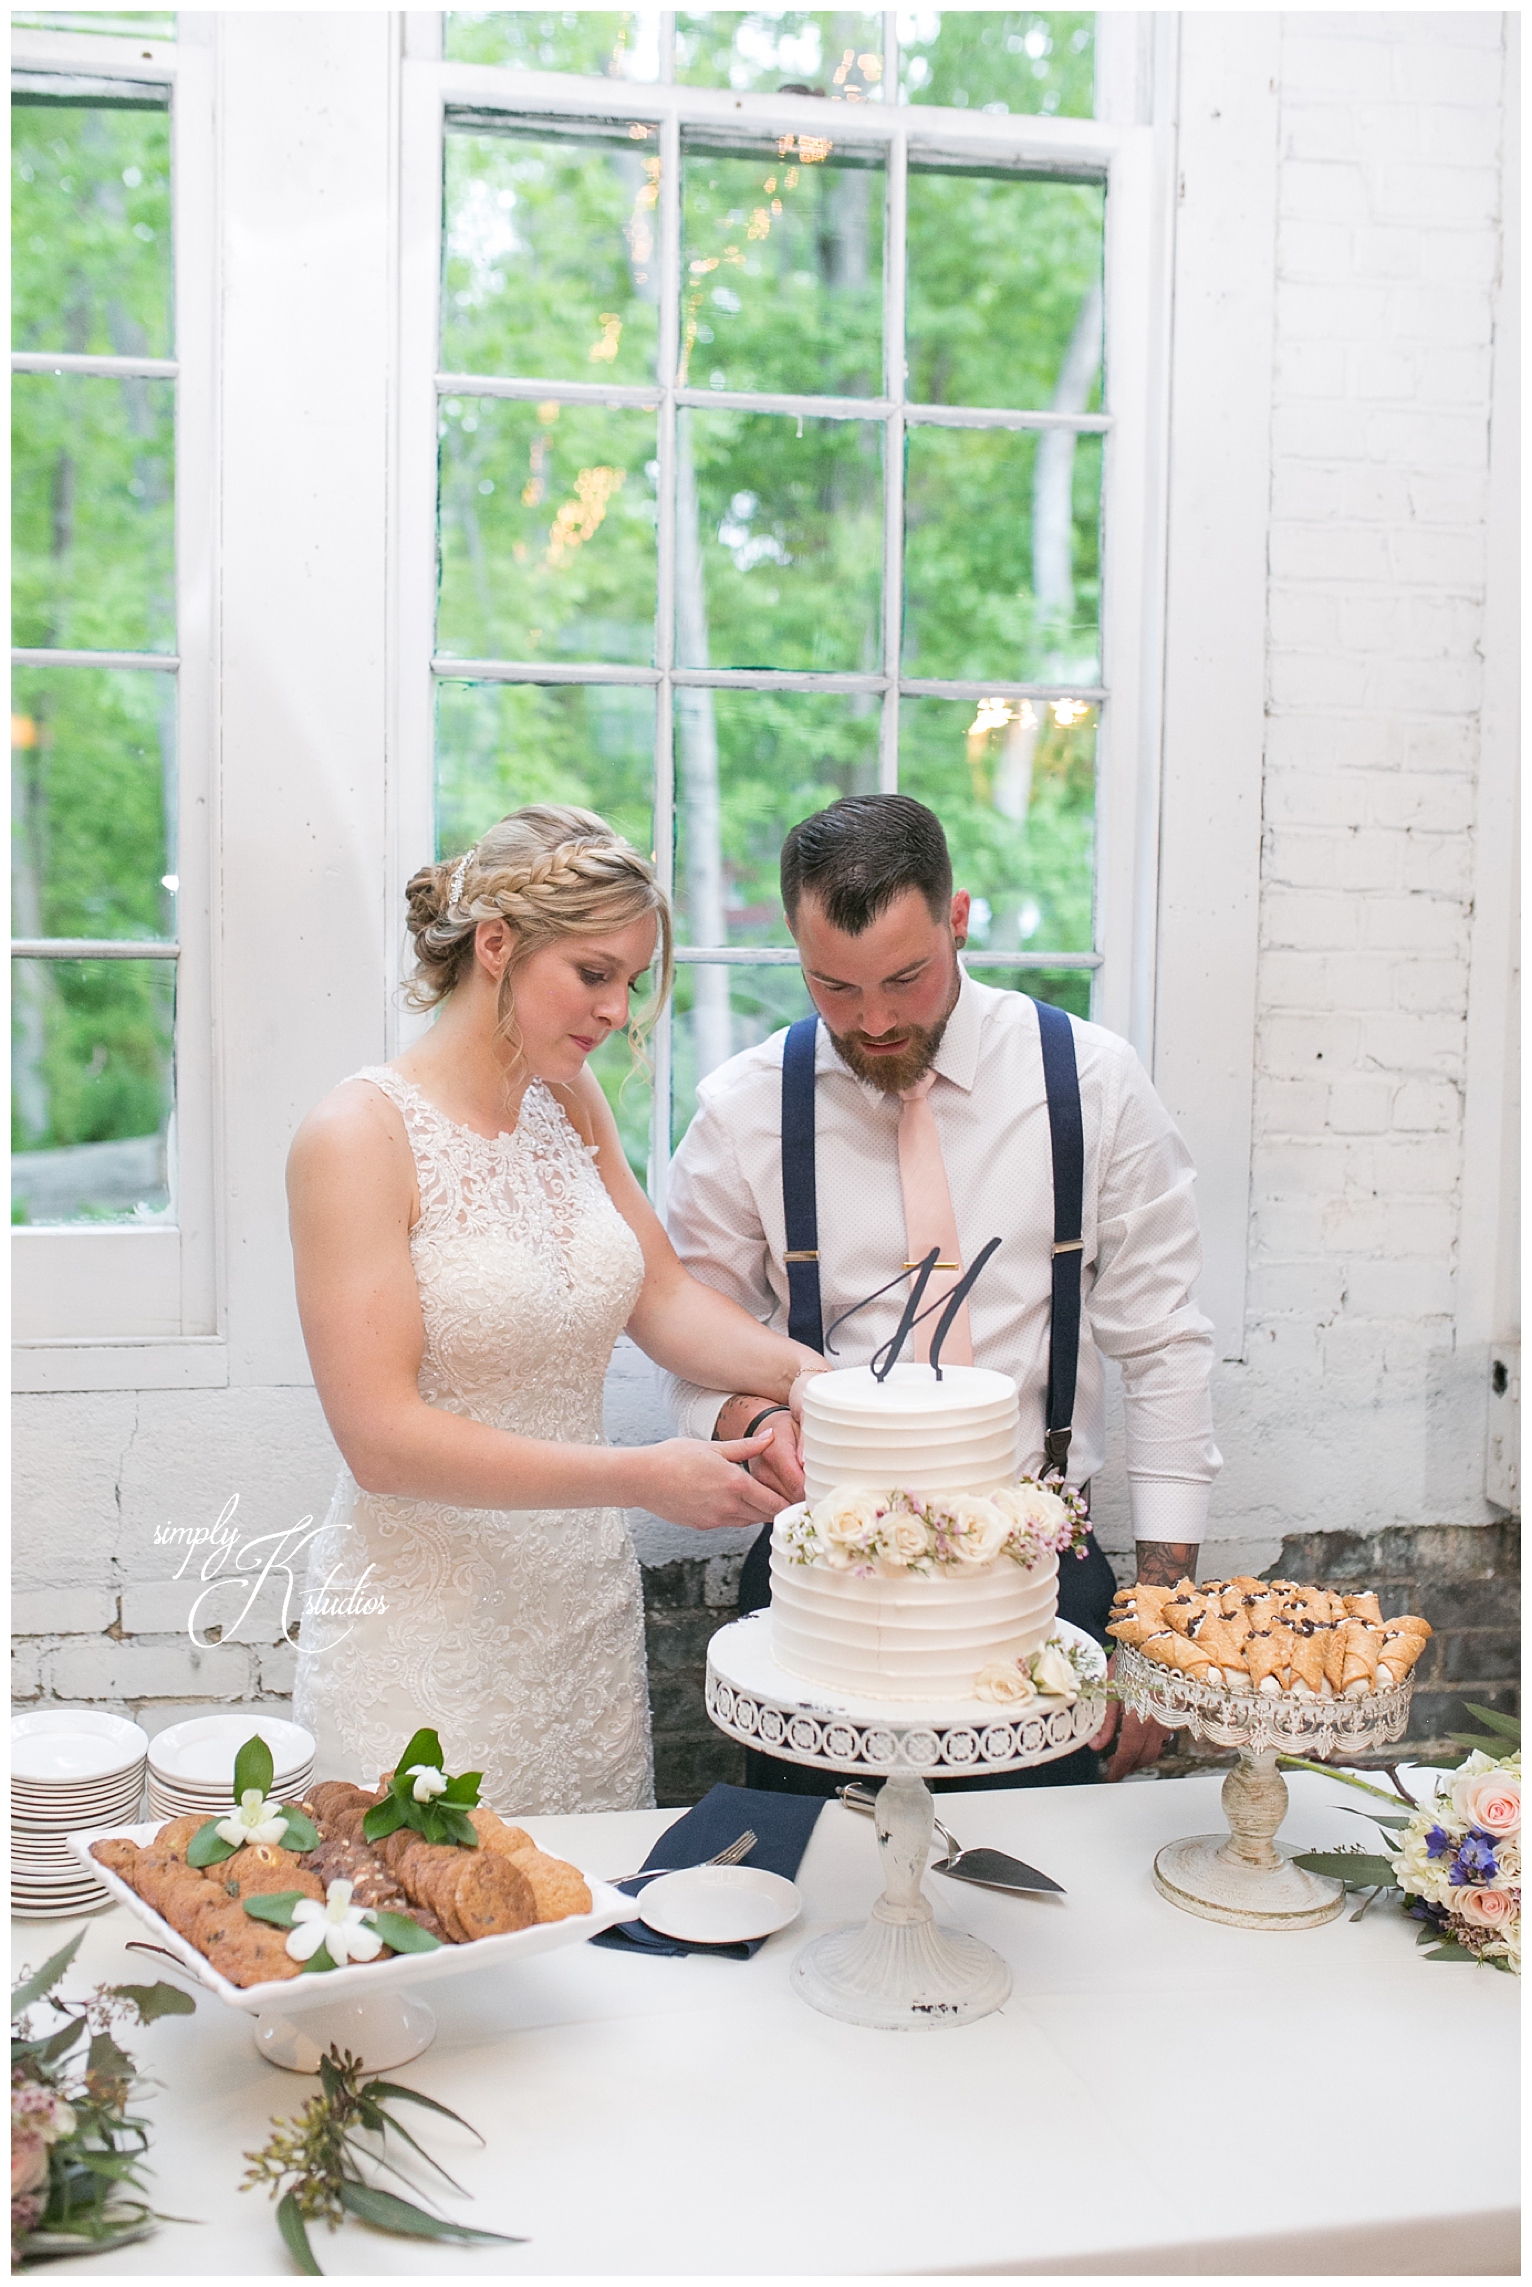 Cake Cutting at The Lace Factory.jpg